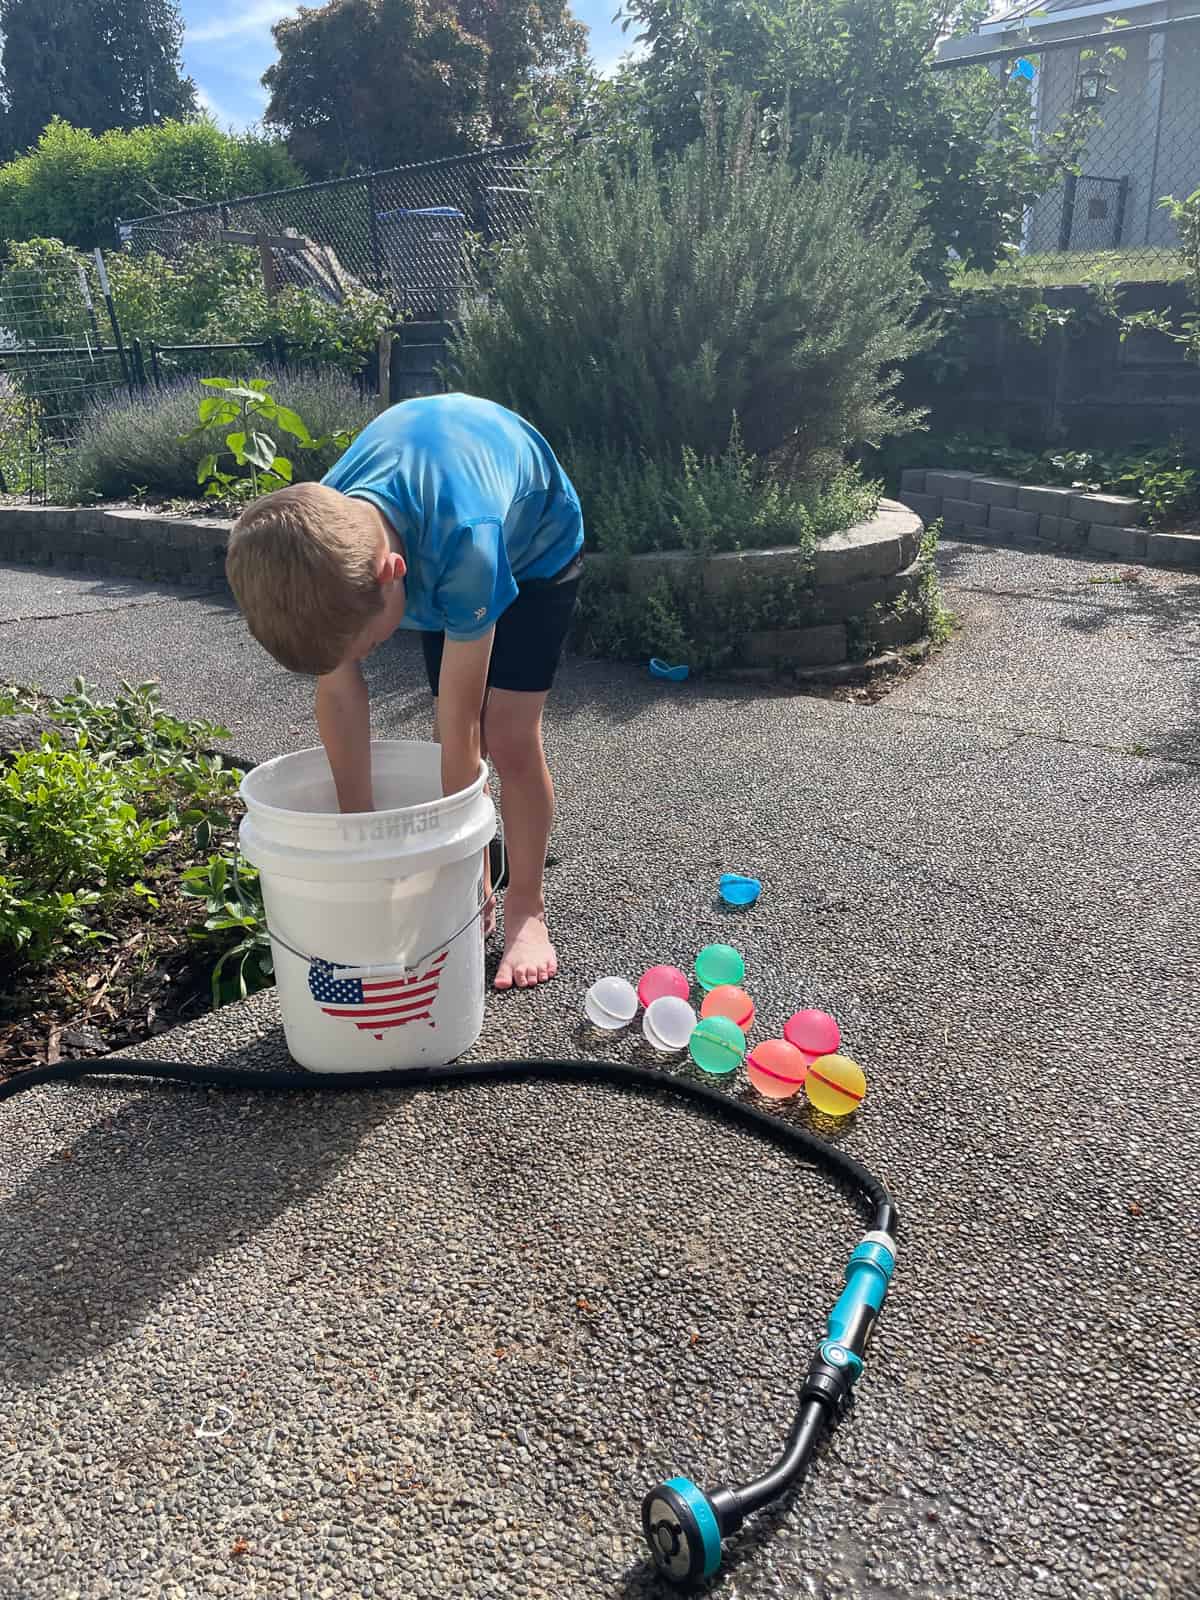 a kid playing in a bucket with reusable water balloons.